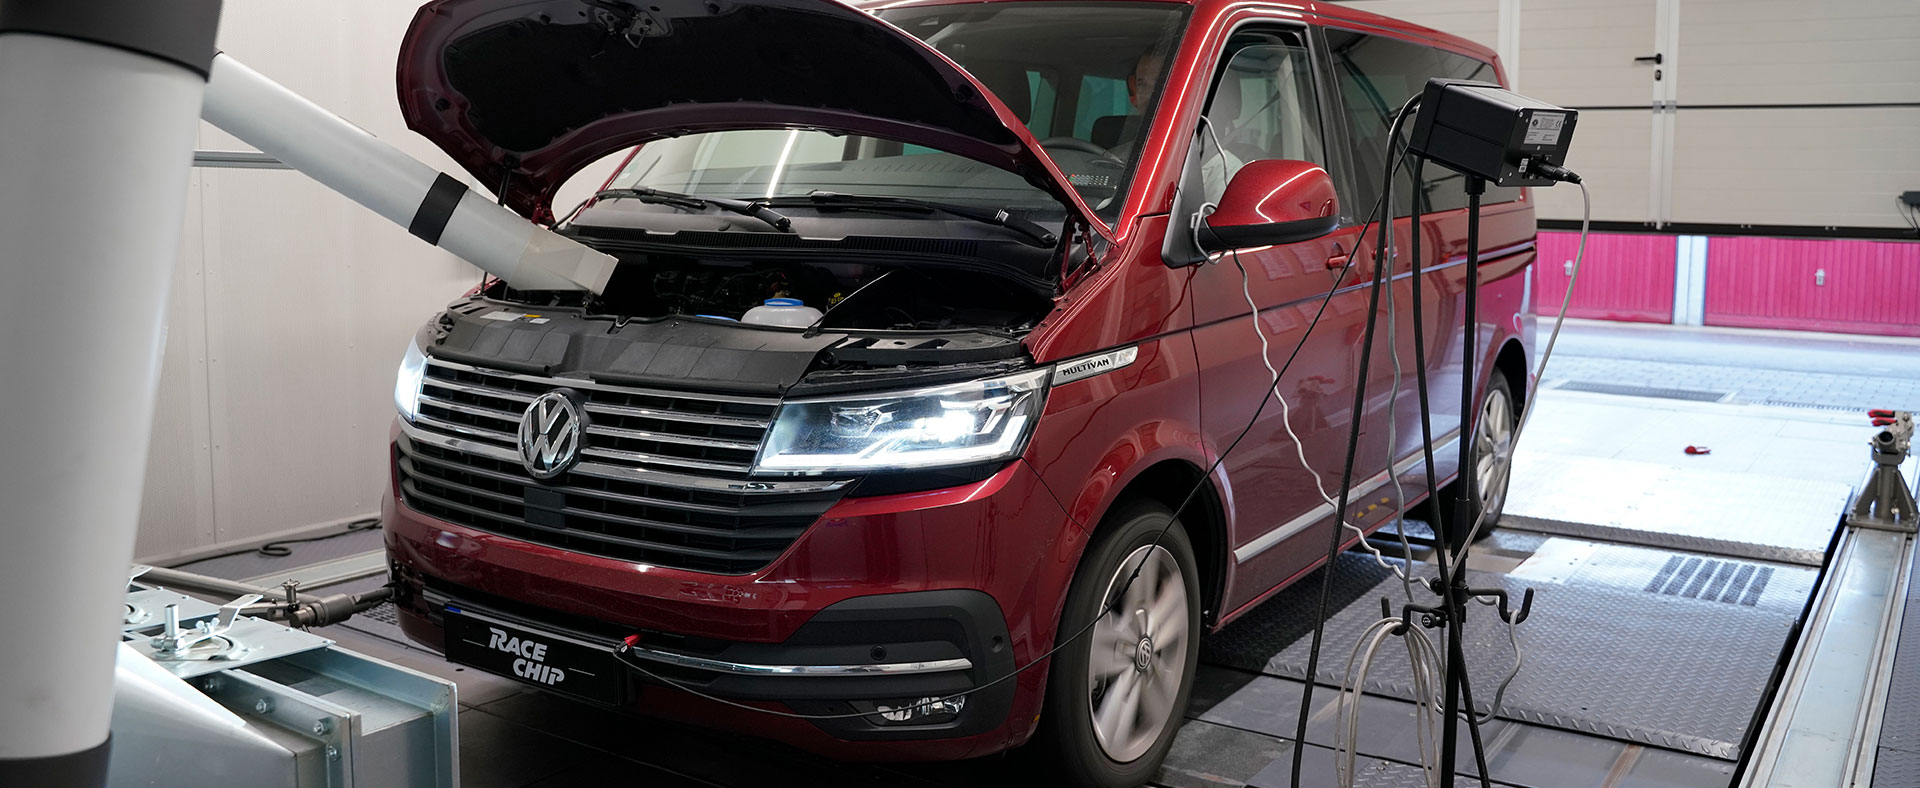 VW T6.1 Multivan Chip Tuning – Can a family car be actually fast